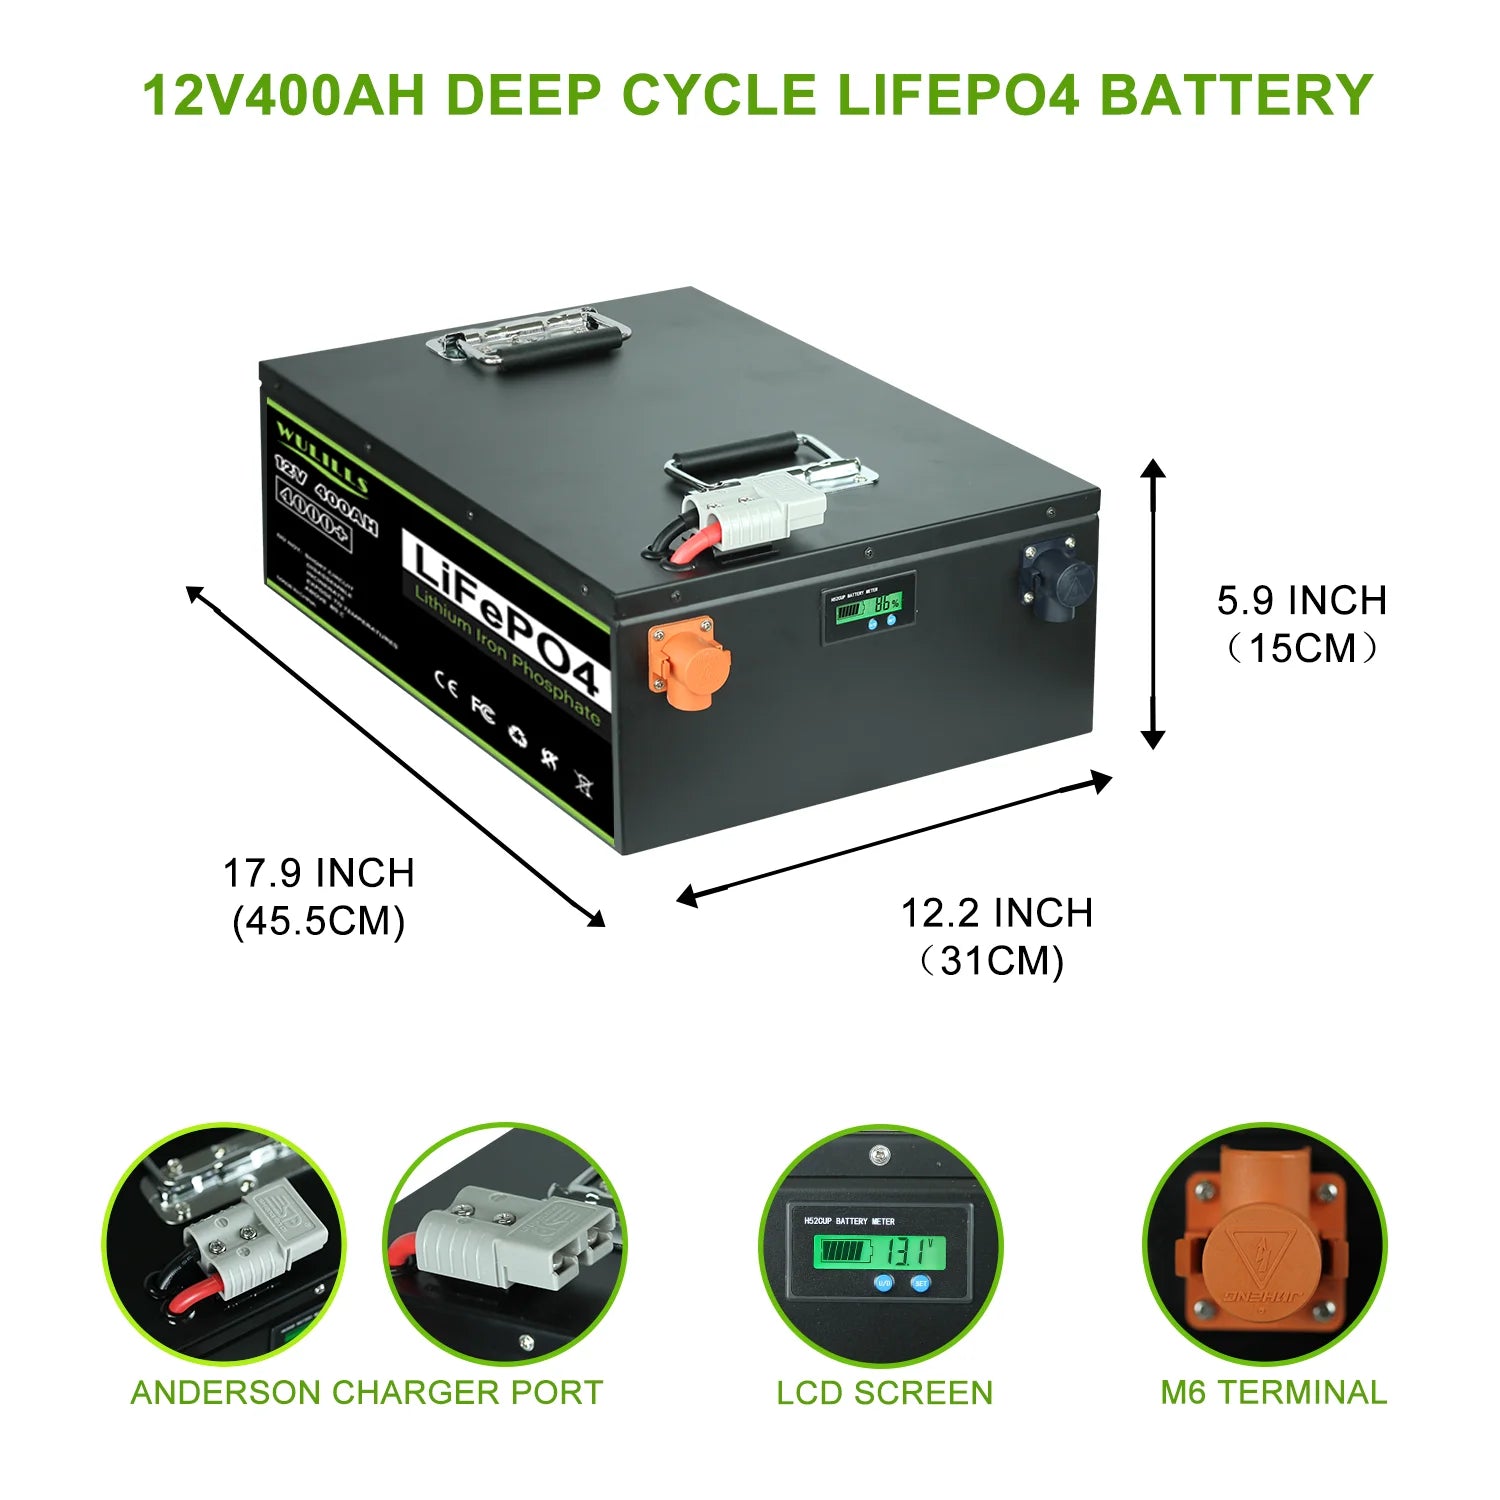 Deep cycle lithium iron phosphate battery with built-in management system for safe energy storage.